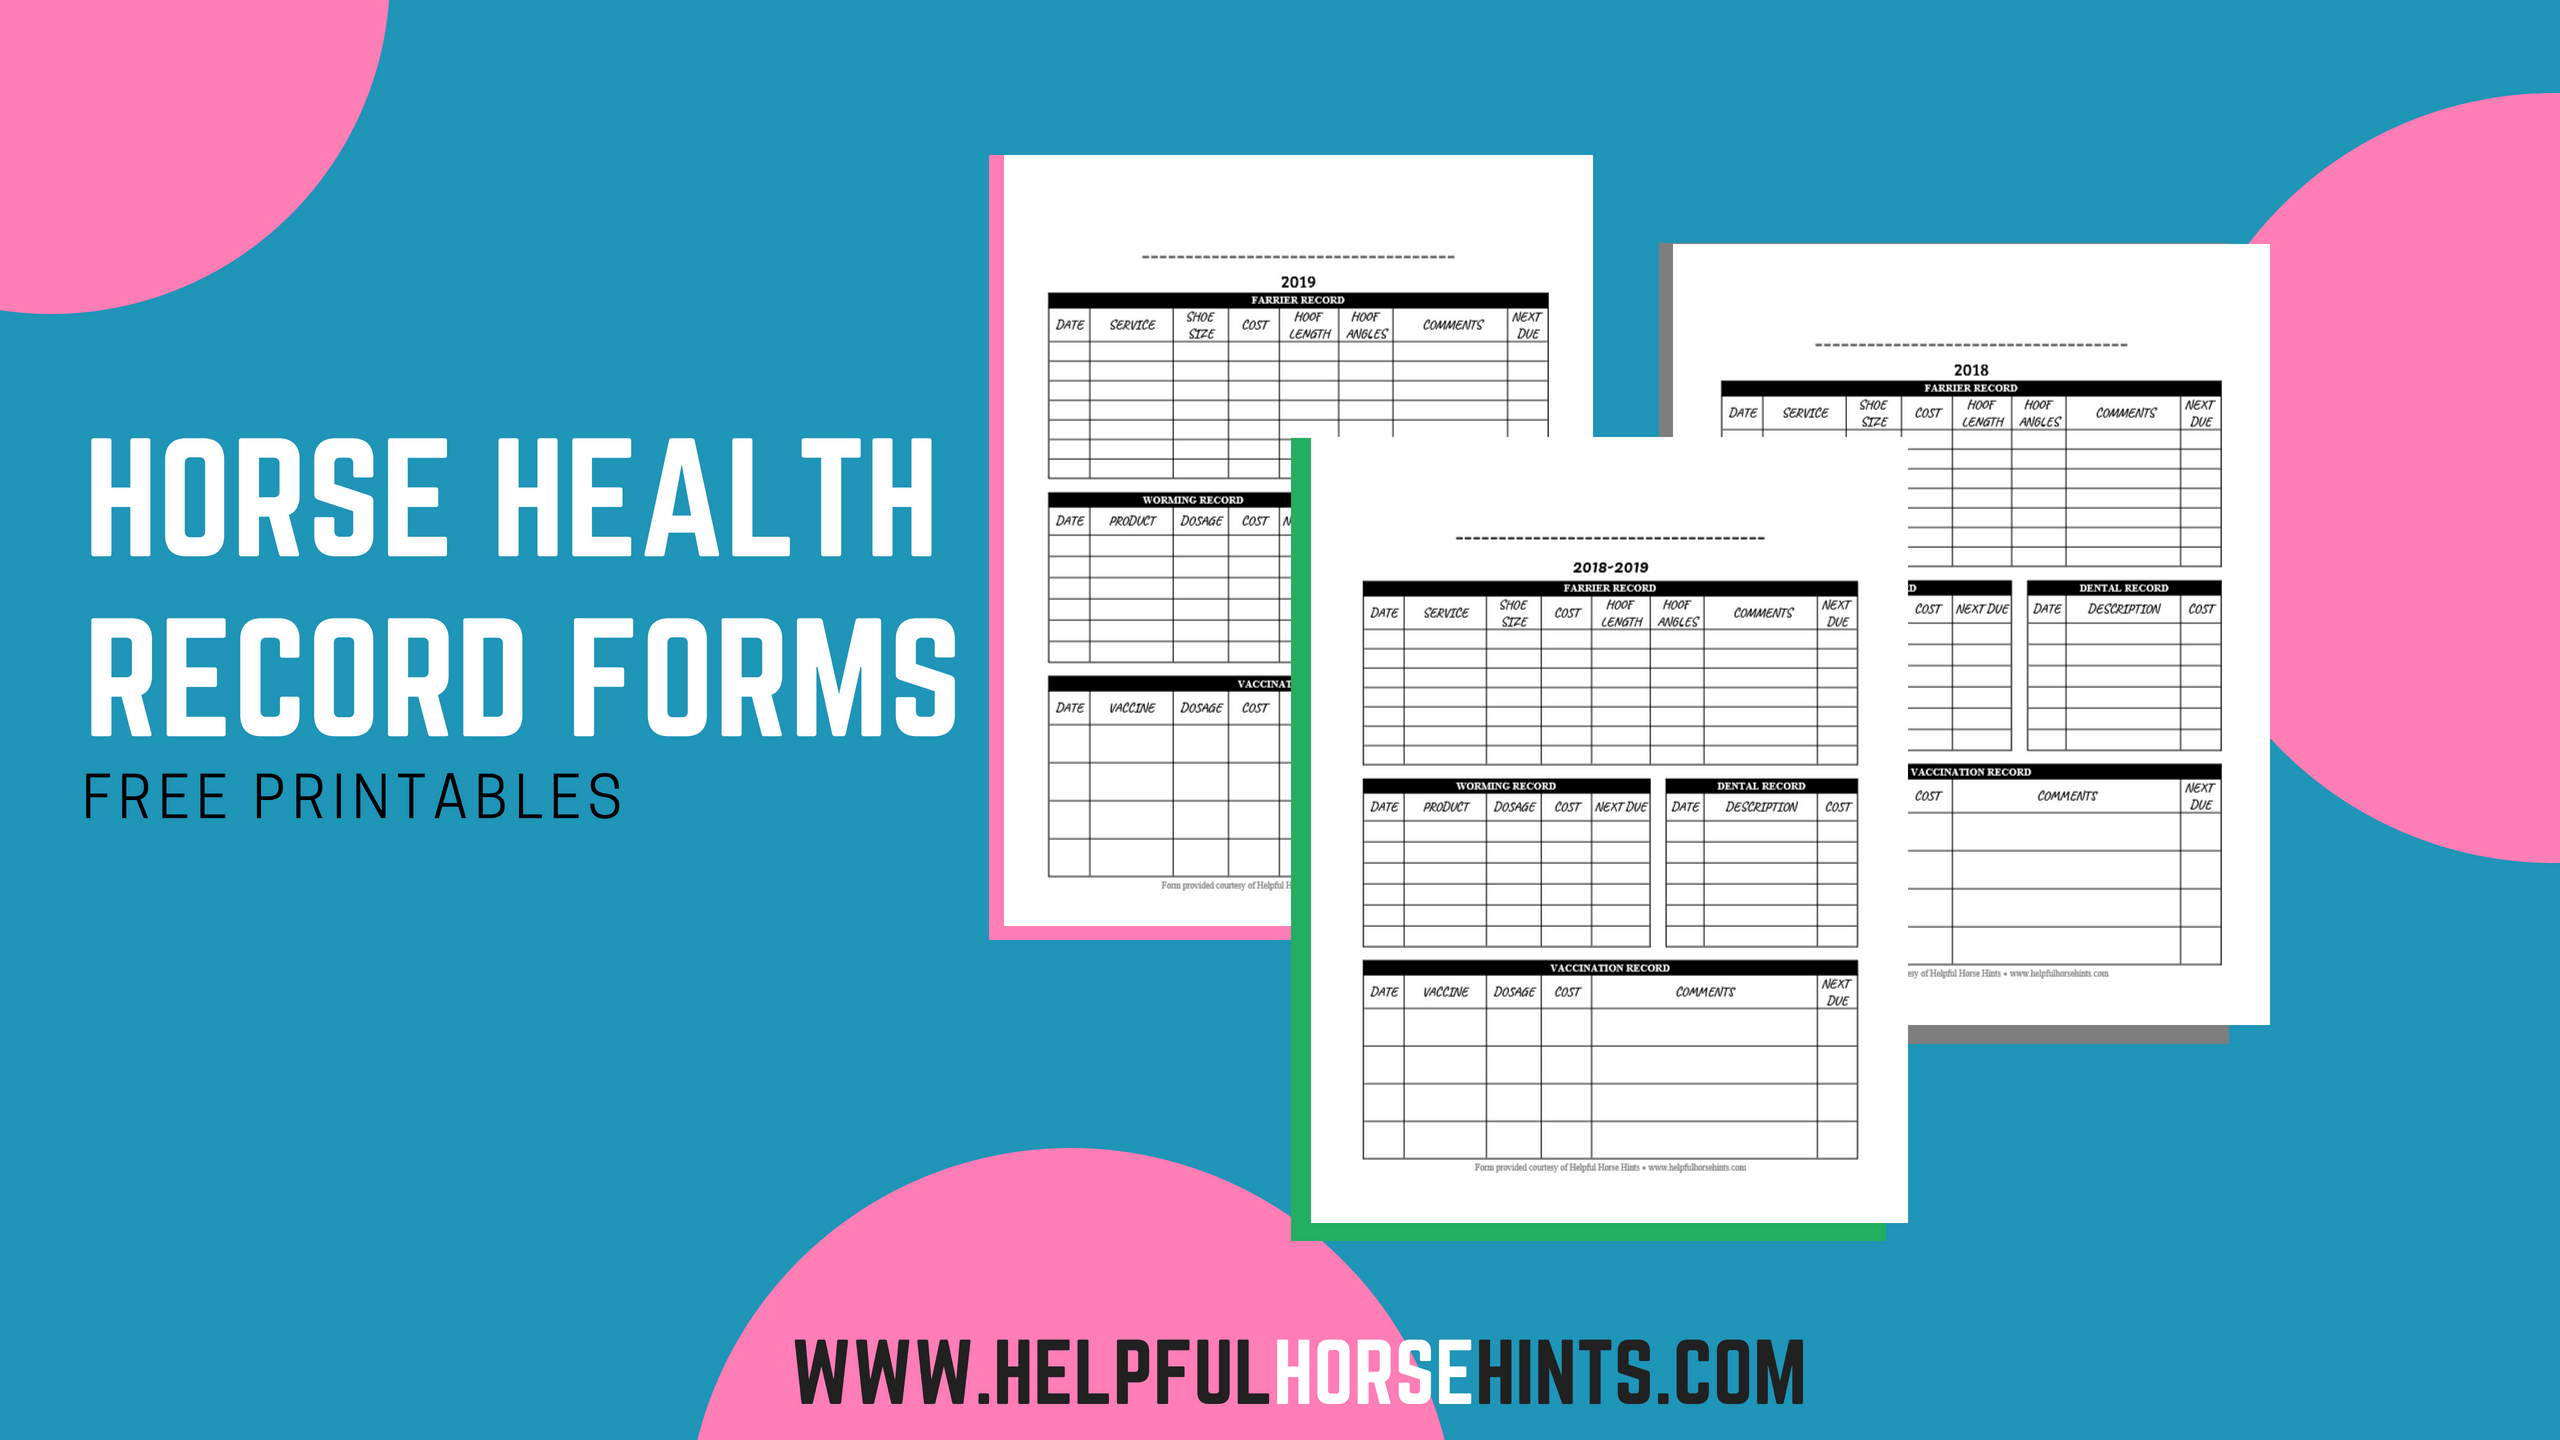 Horse Health Record Form  Free Printable Pdf  Helpful Horse Hints Or Horse Stable Management Worksheets